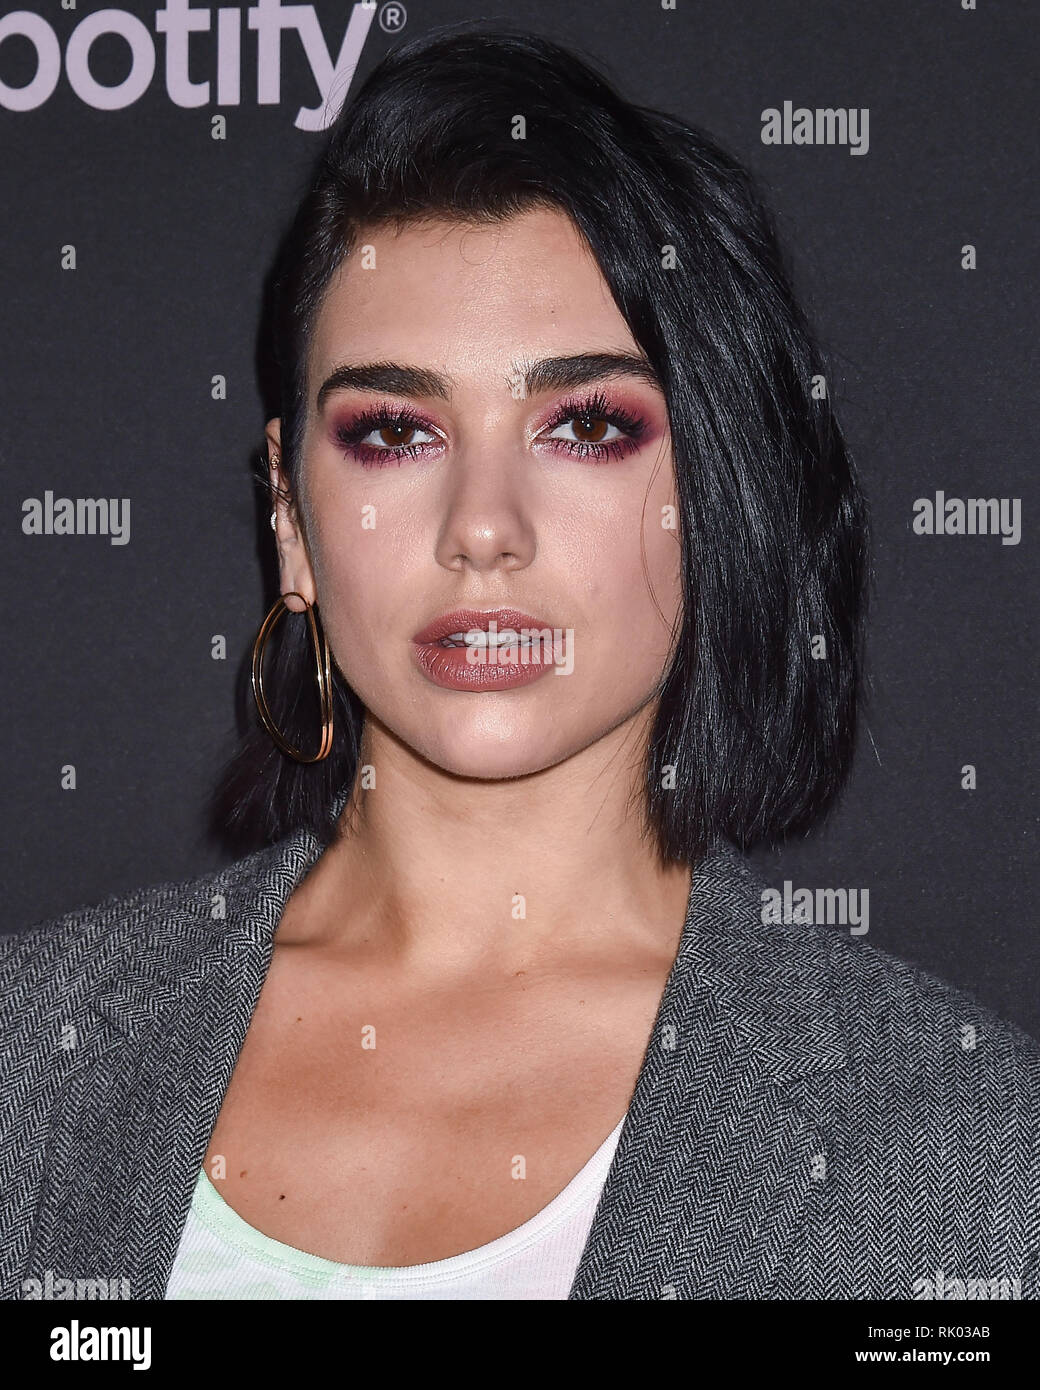 Los Angeles, United States. 07th Feb, 2019. LOS ANGELES, CA, USA - FEBRUARY  07: Singer Dua Lipa wearing Calvin Klein arrives at the Spotify Best New  Artist Party 2019 held at the